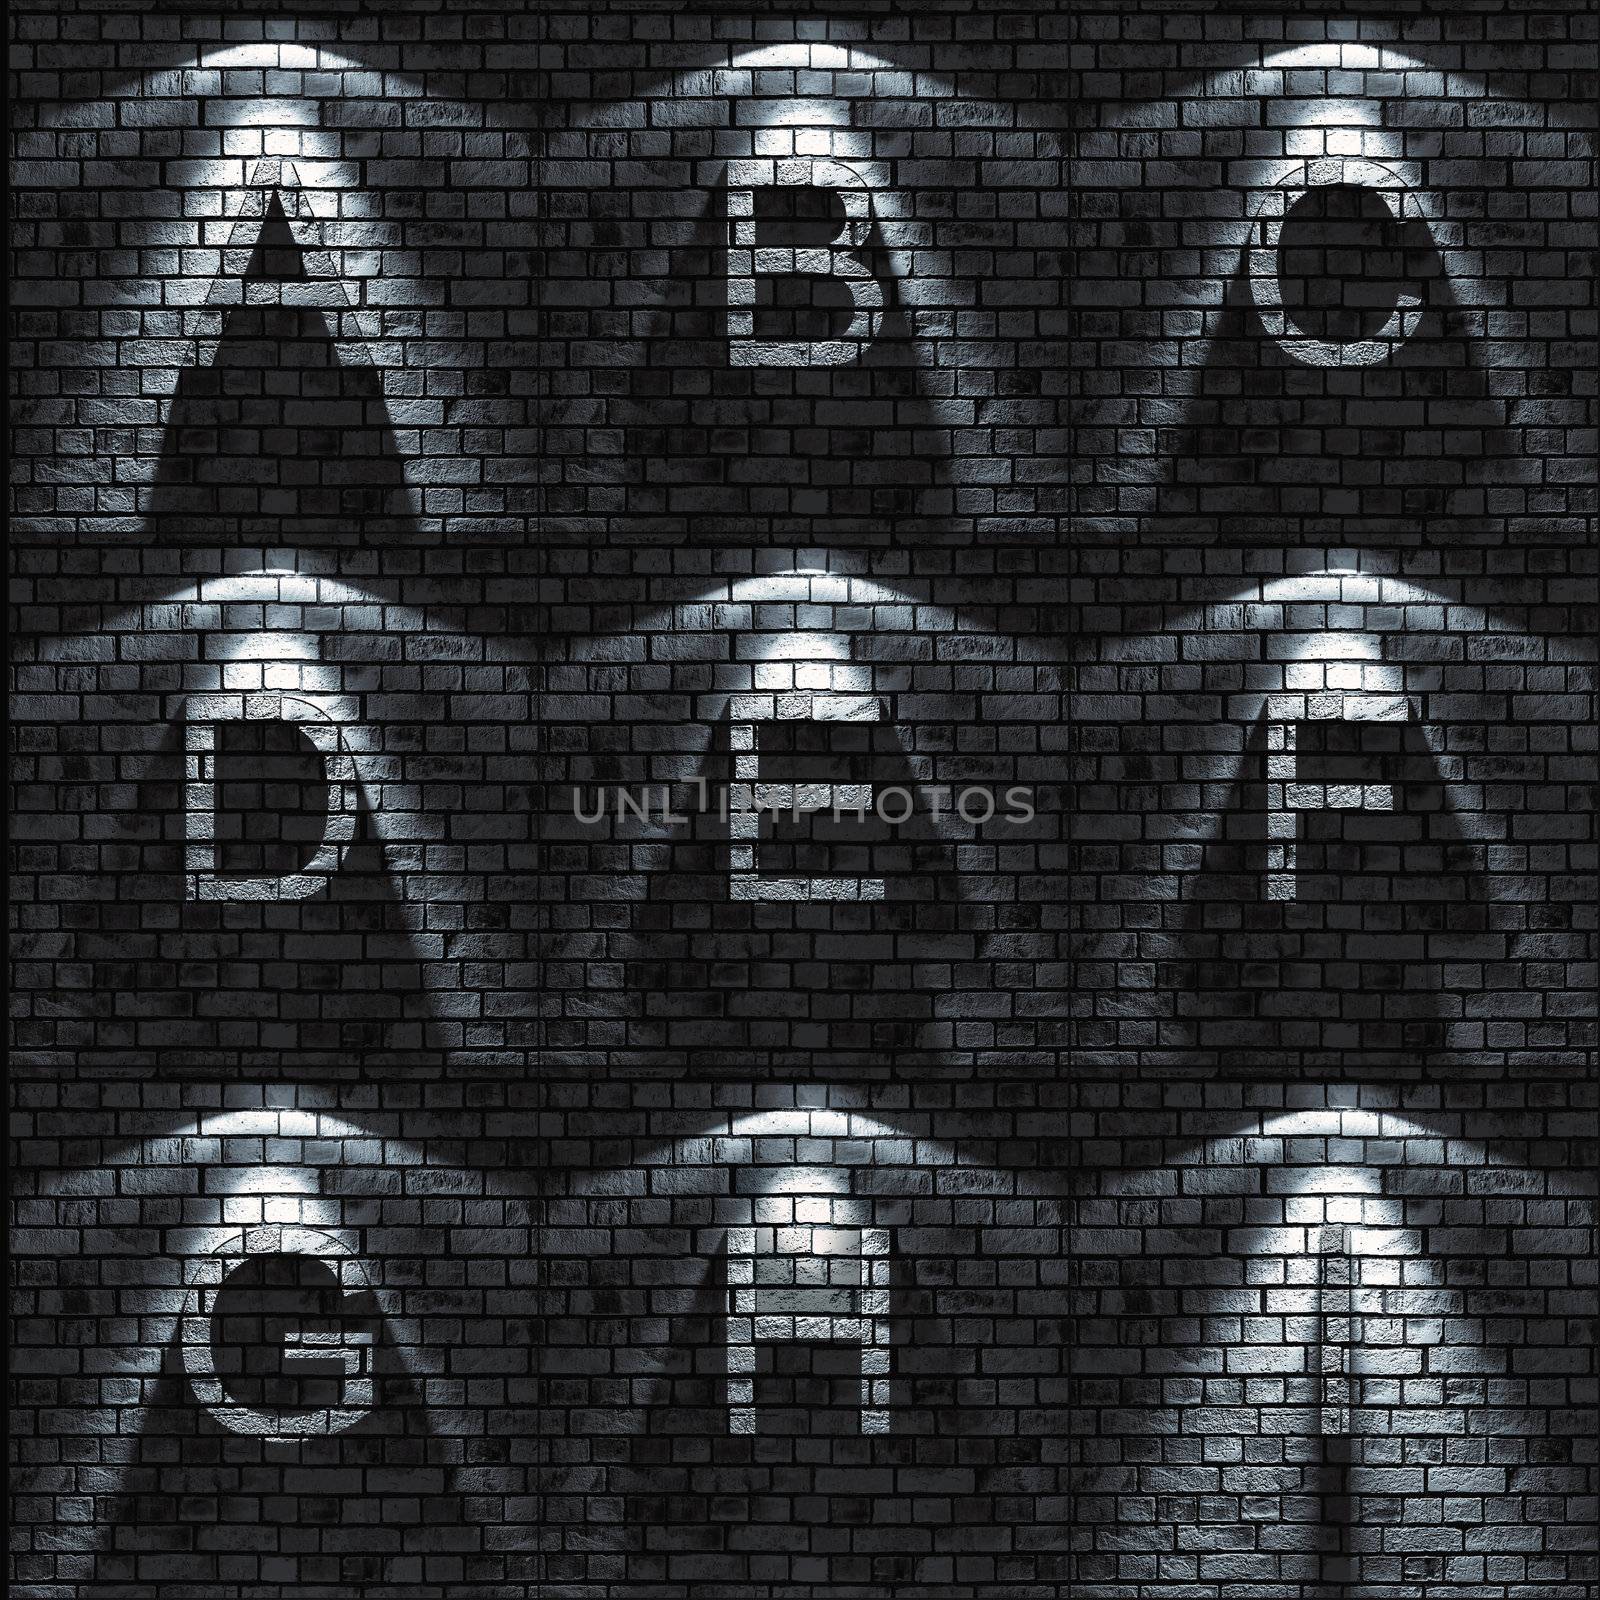 bumped Brick wall textured ABC set ( all sets containing letters, numbers, signs and symbols)